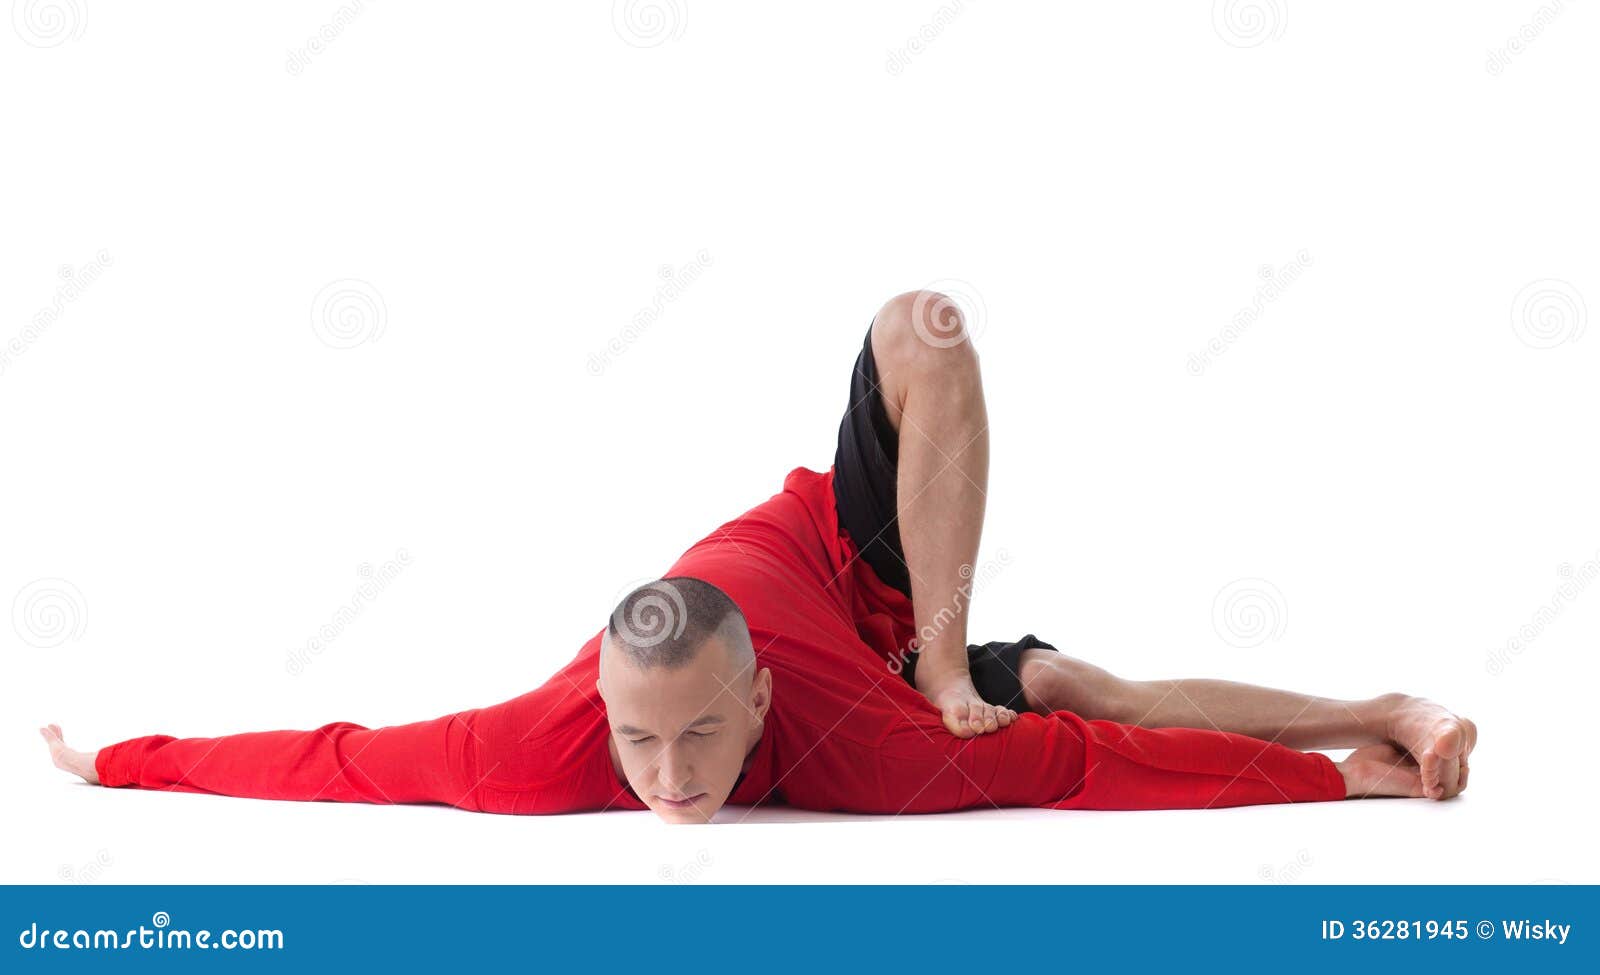 Flexible Man Posing in Difficult Yoga Pose Stock Image - Image of